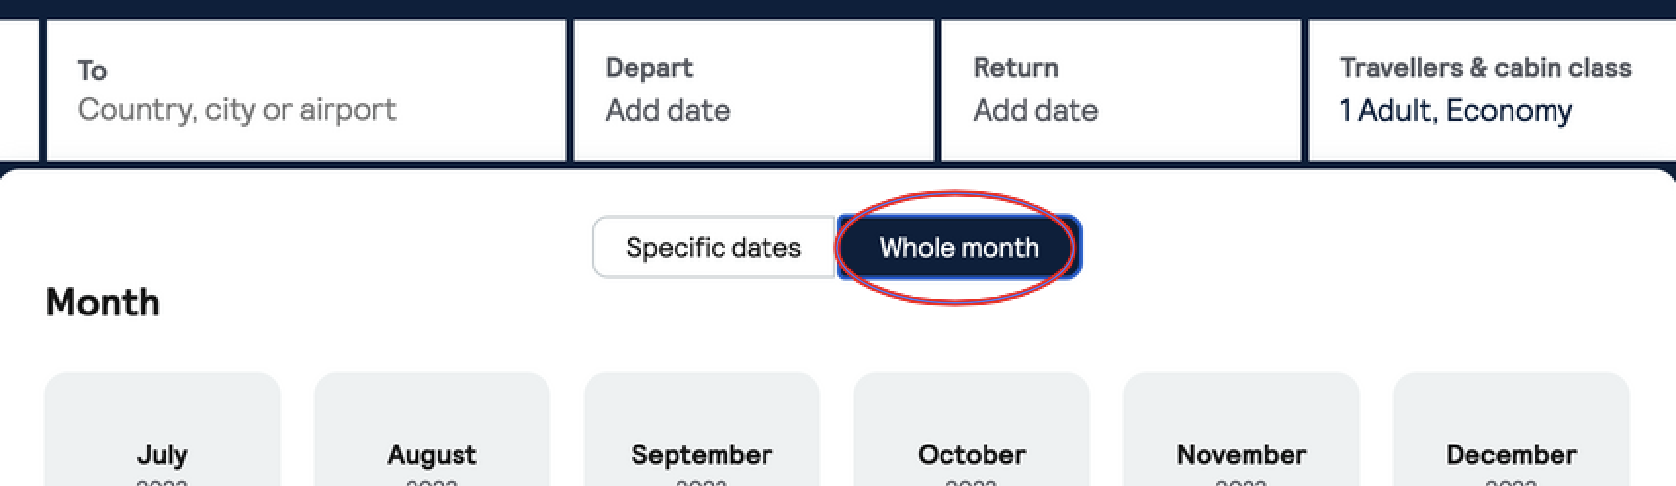 Skyscanner Whole Month Search